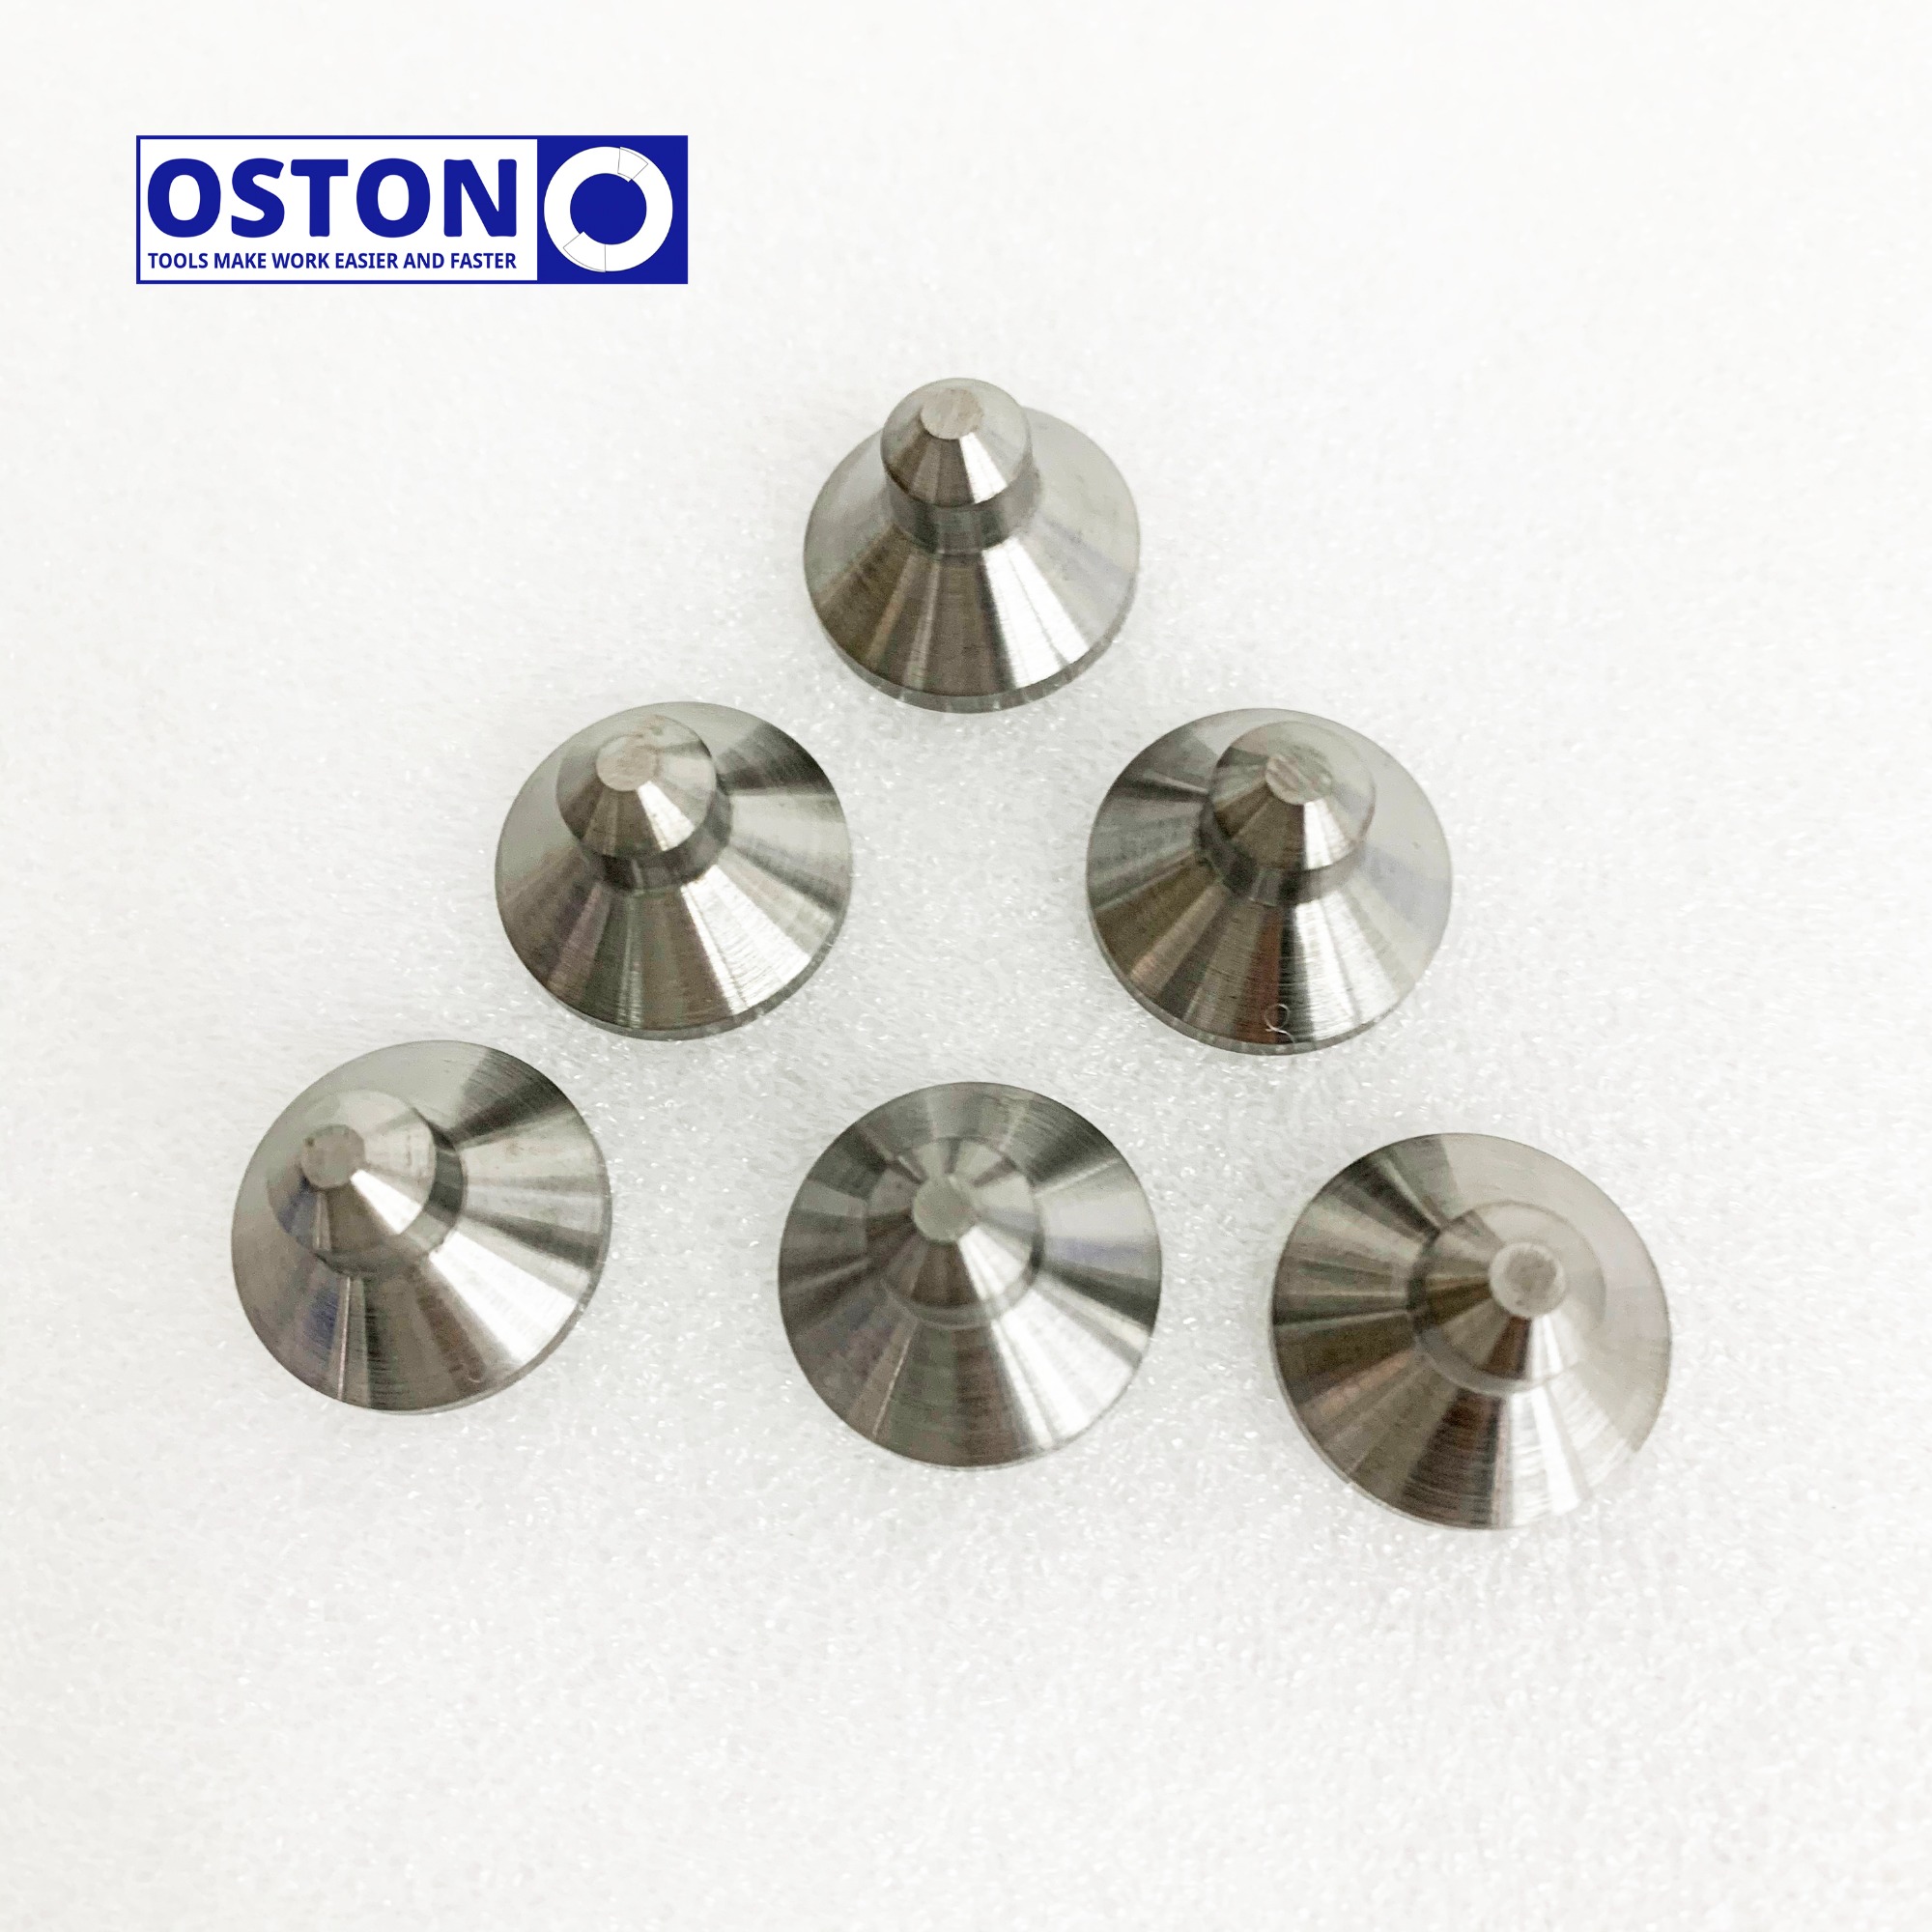 Tungsten Carbide Wear Parts for Valves and Pumps